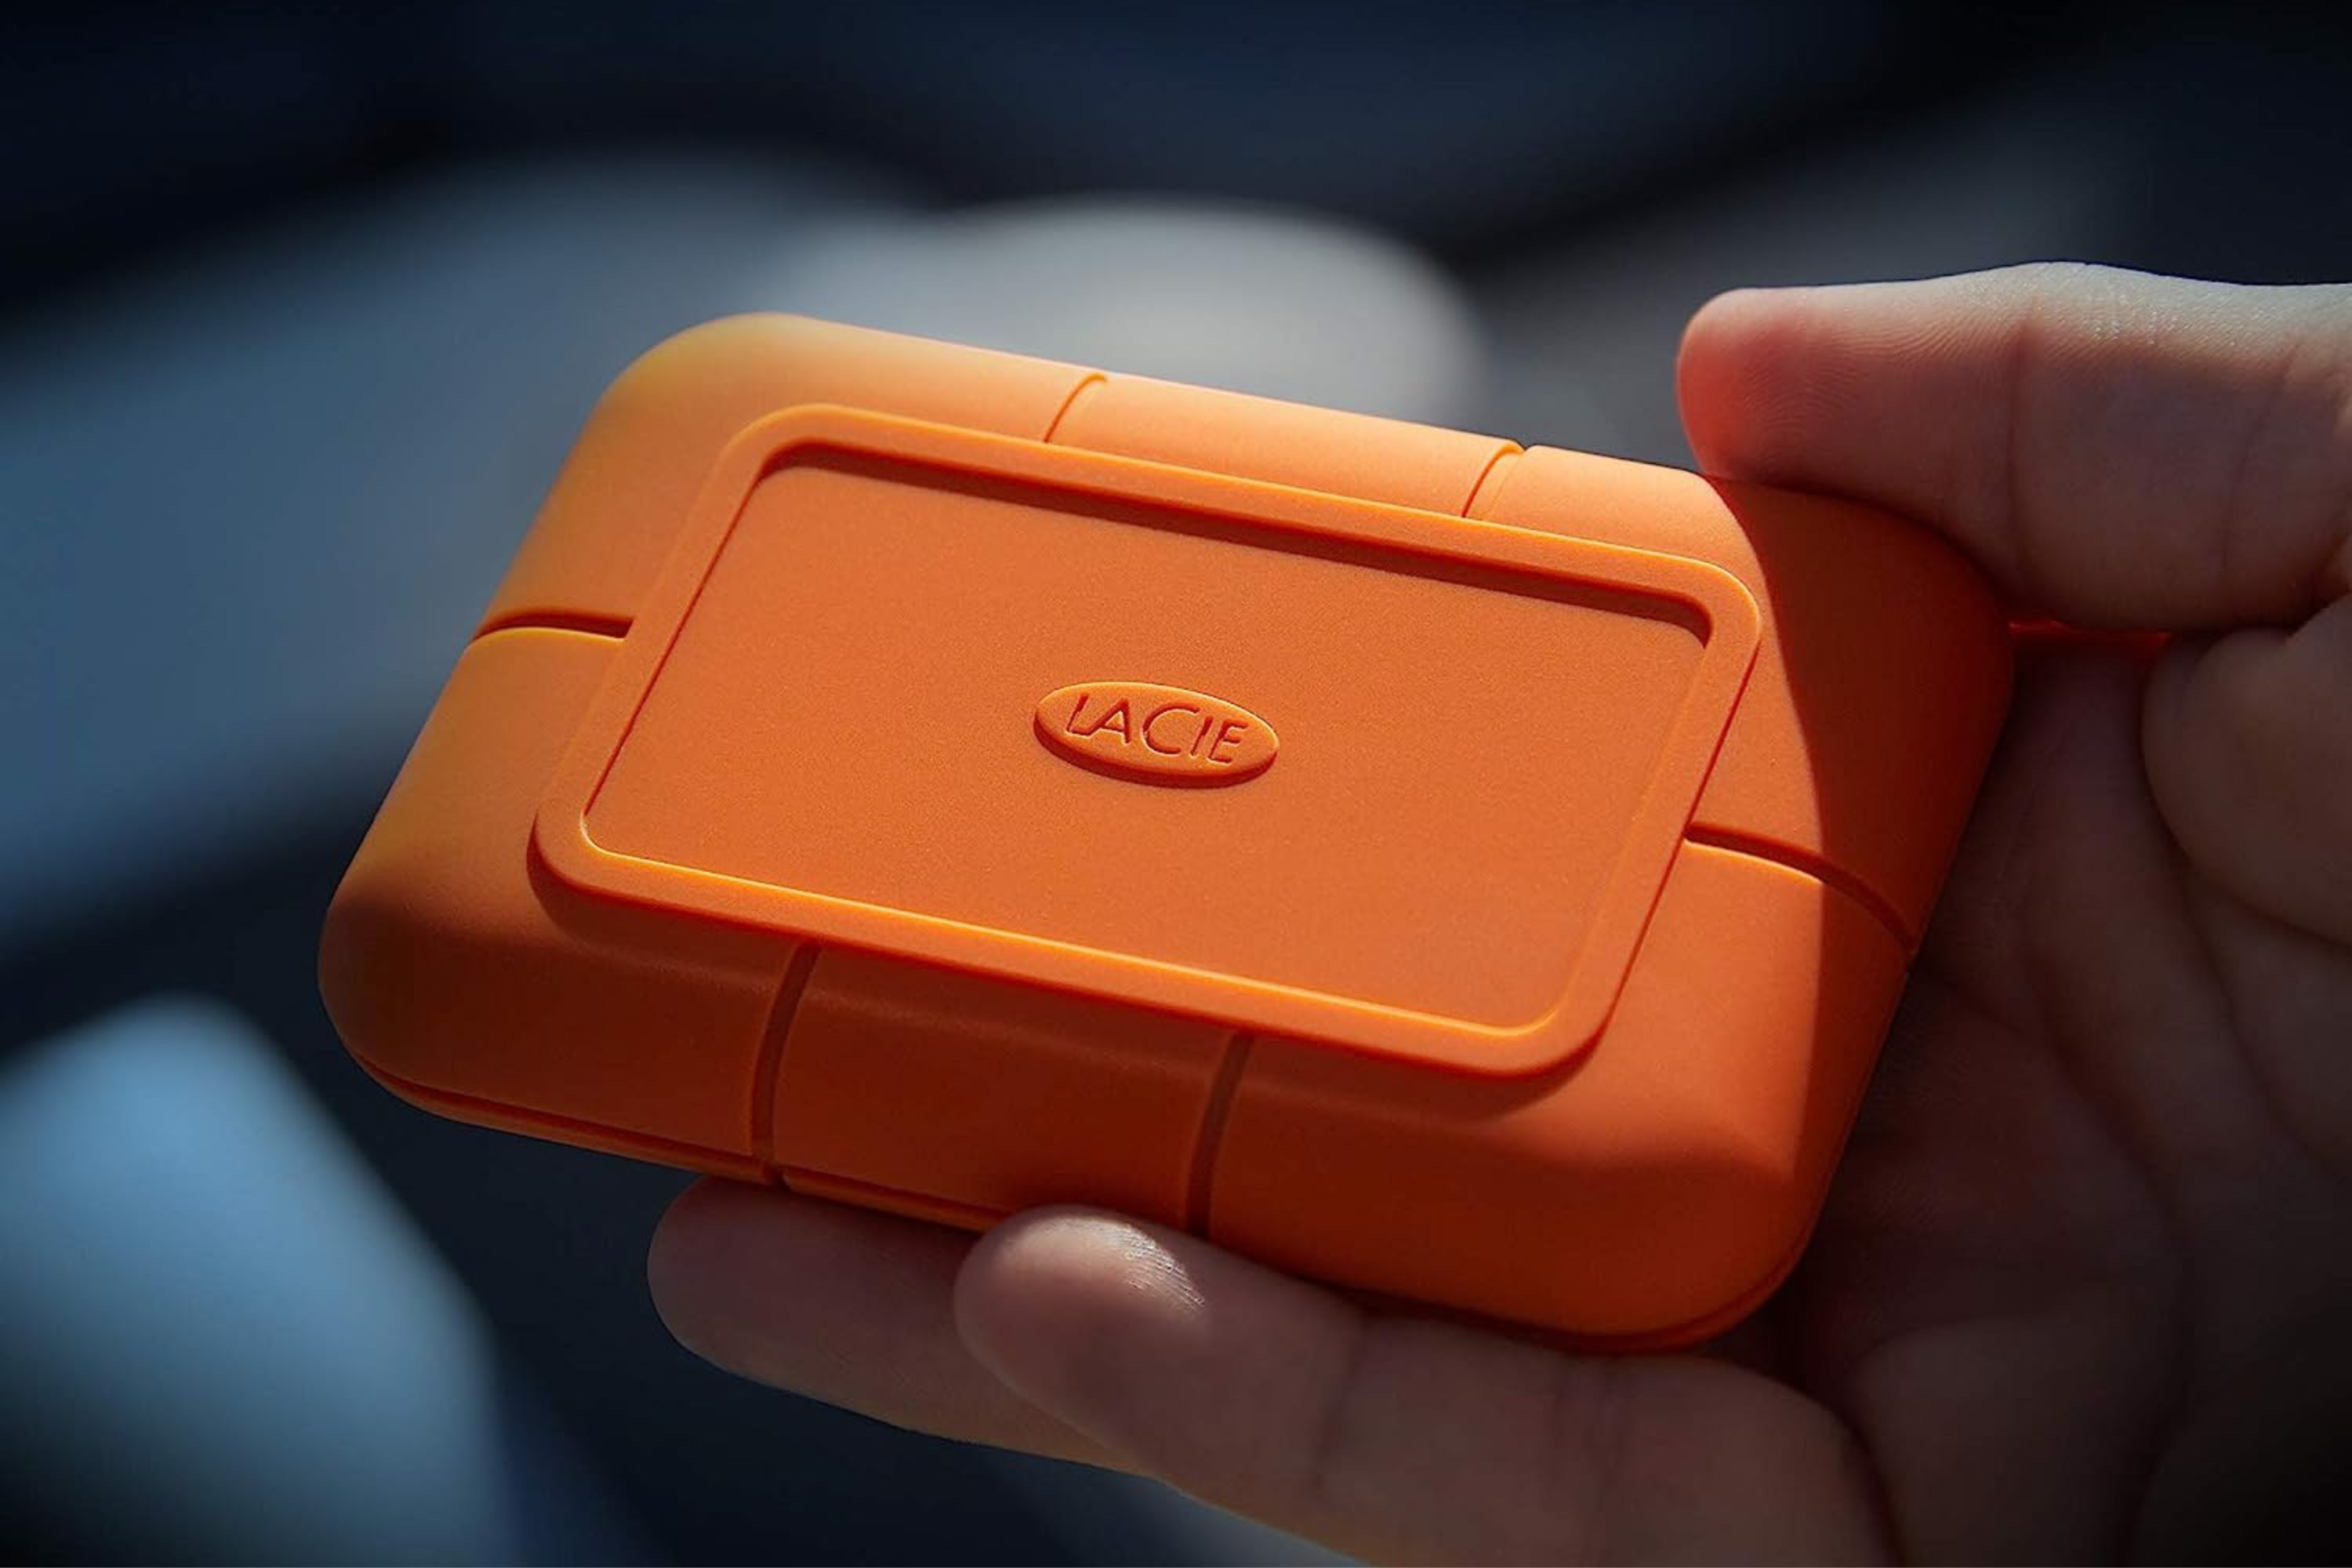 LaCie Rugged SSD in the palm of a person's hand